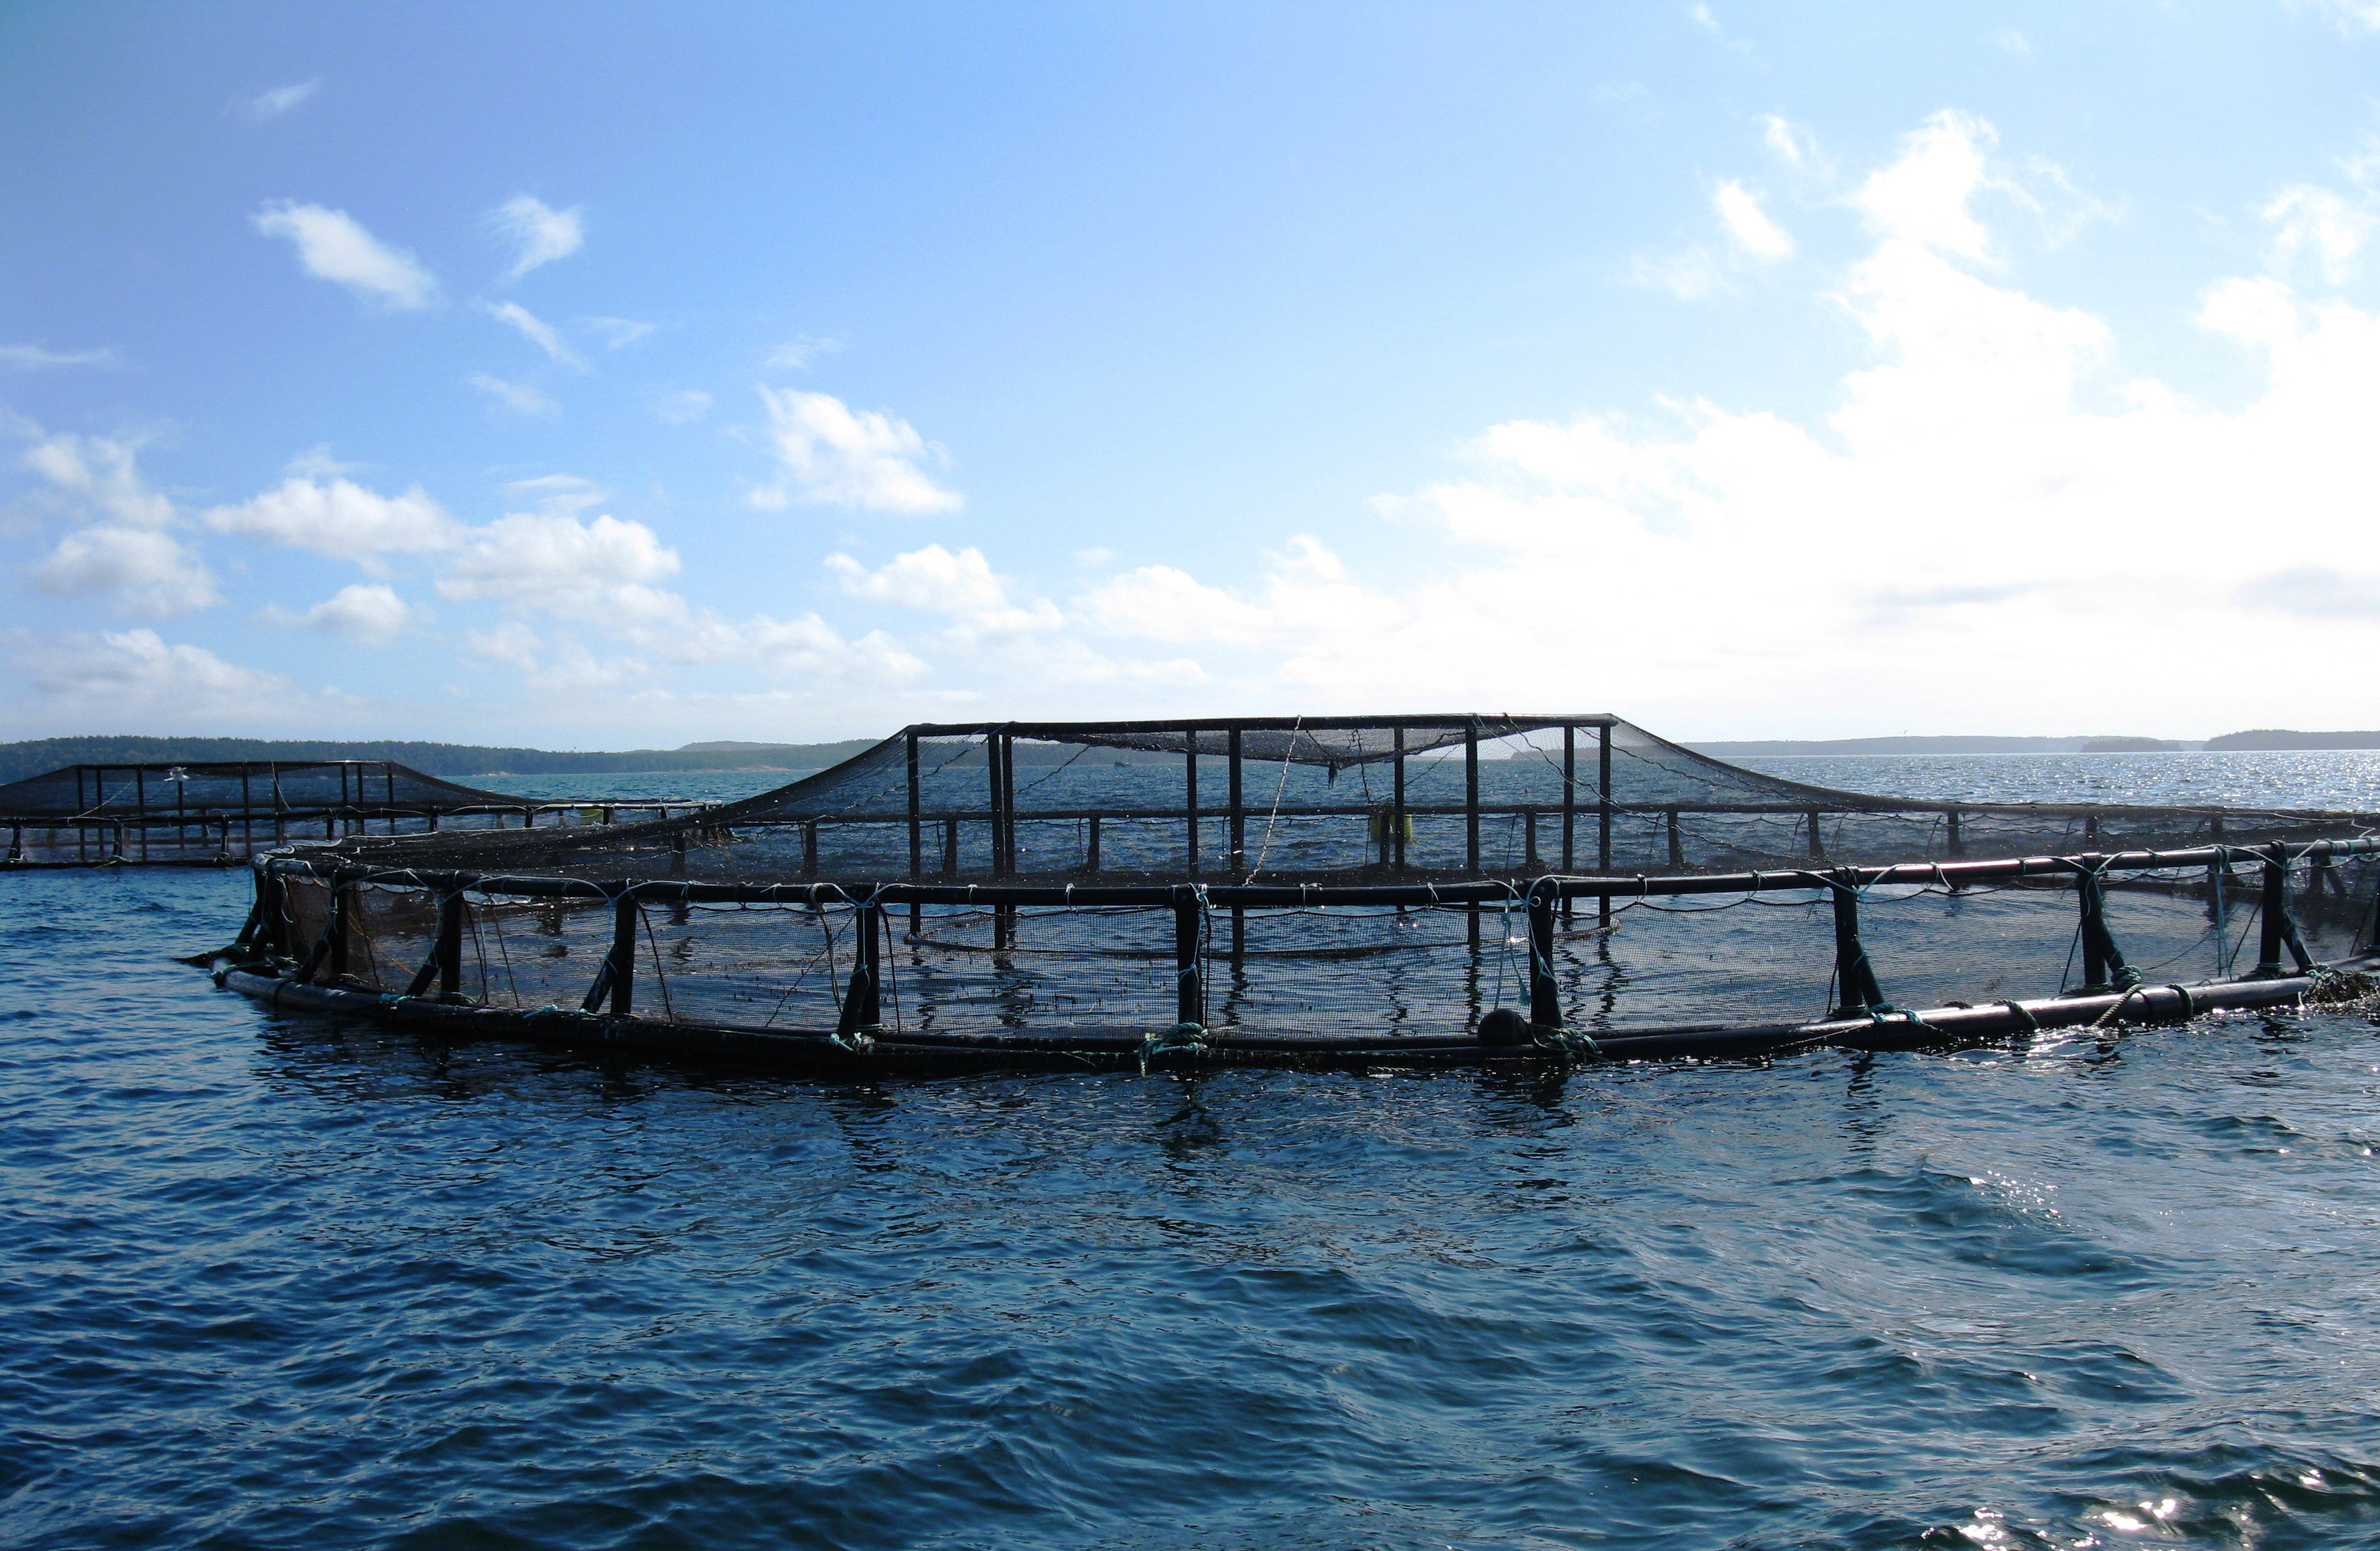 An_aquaculture_pen_in_the_ocean_off_the_coast_of_Maine.jpg